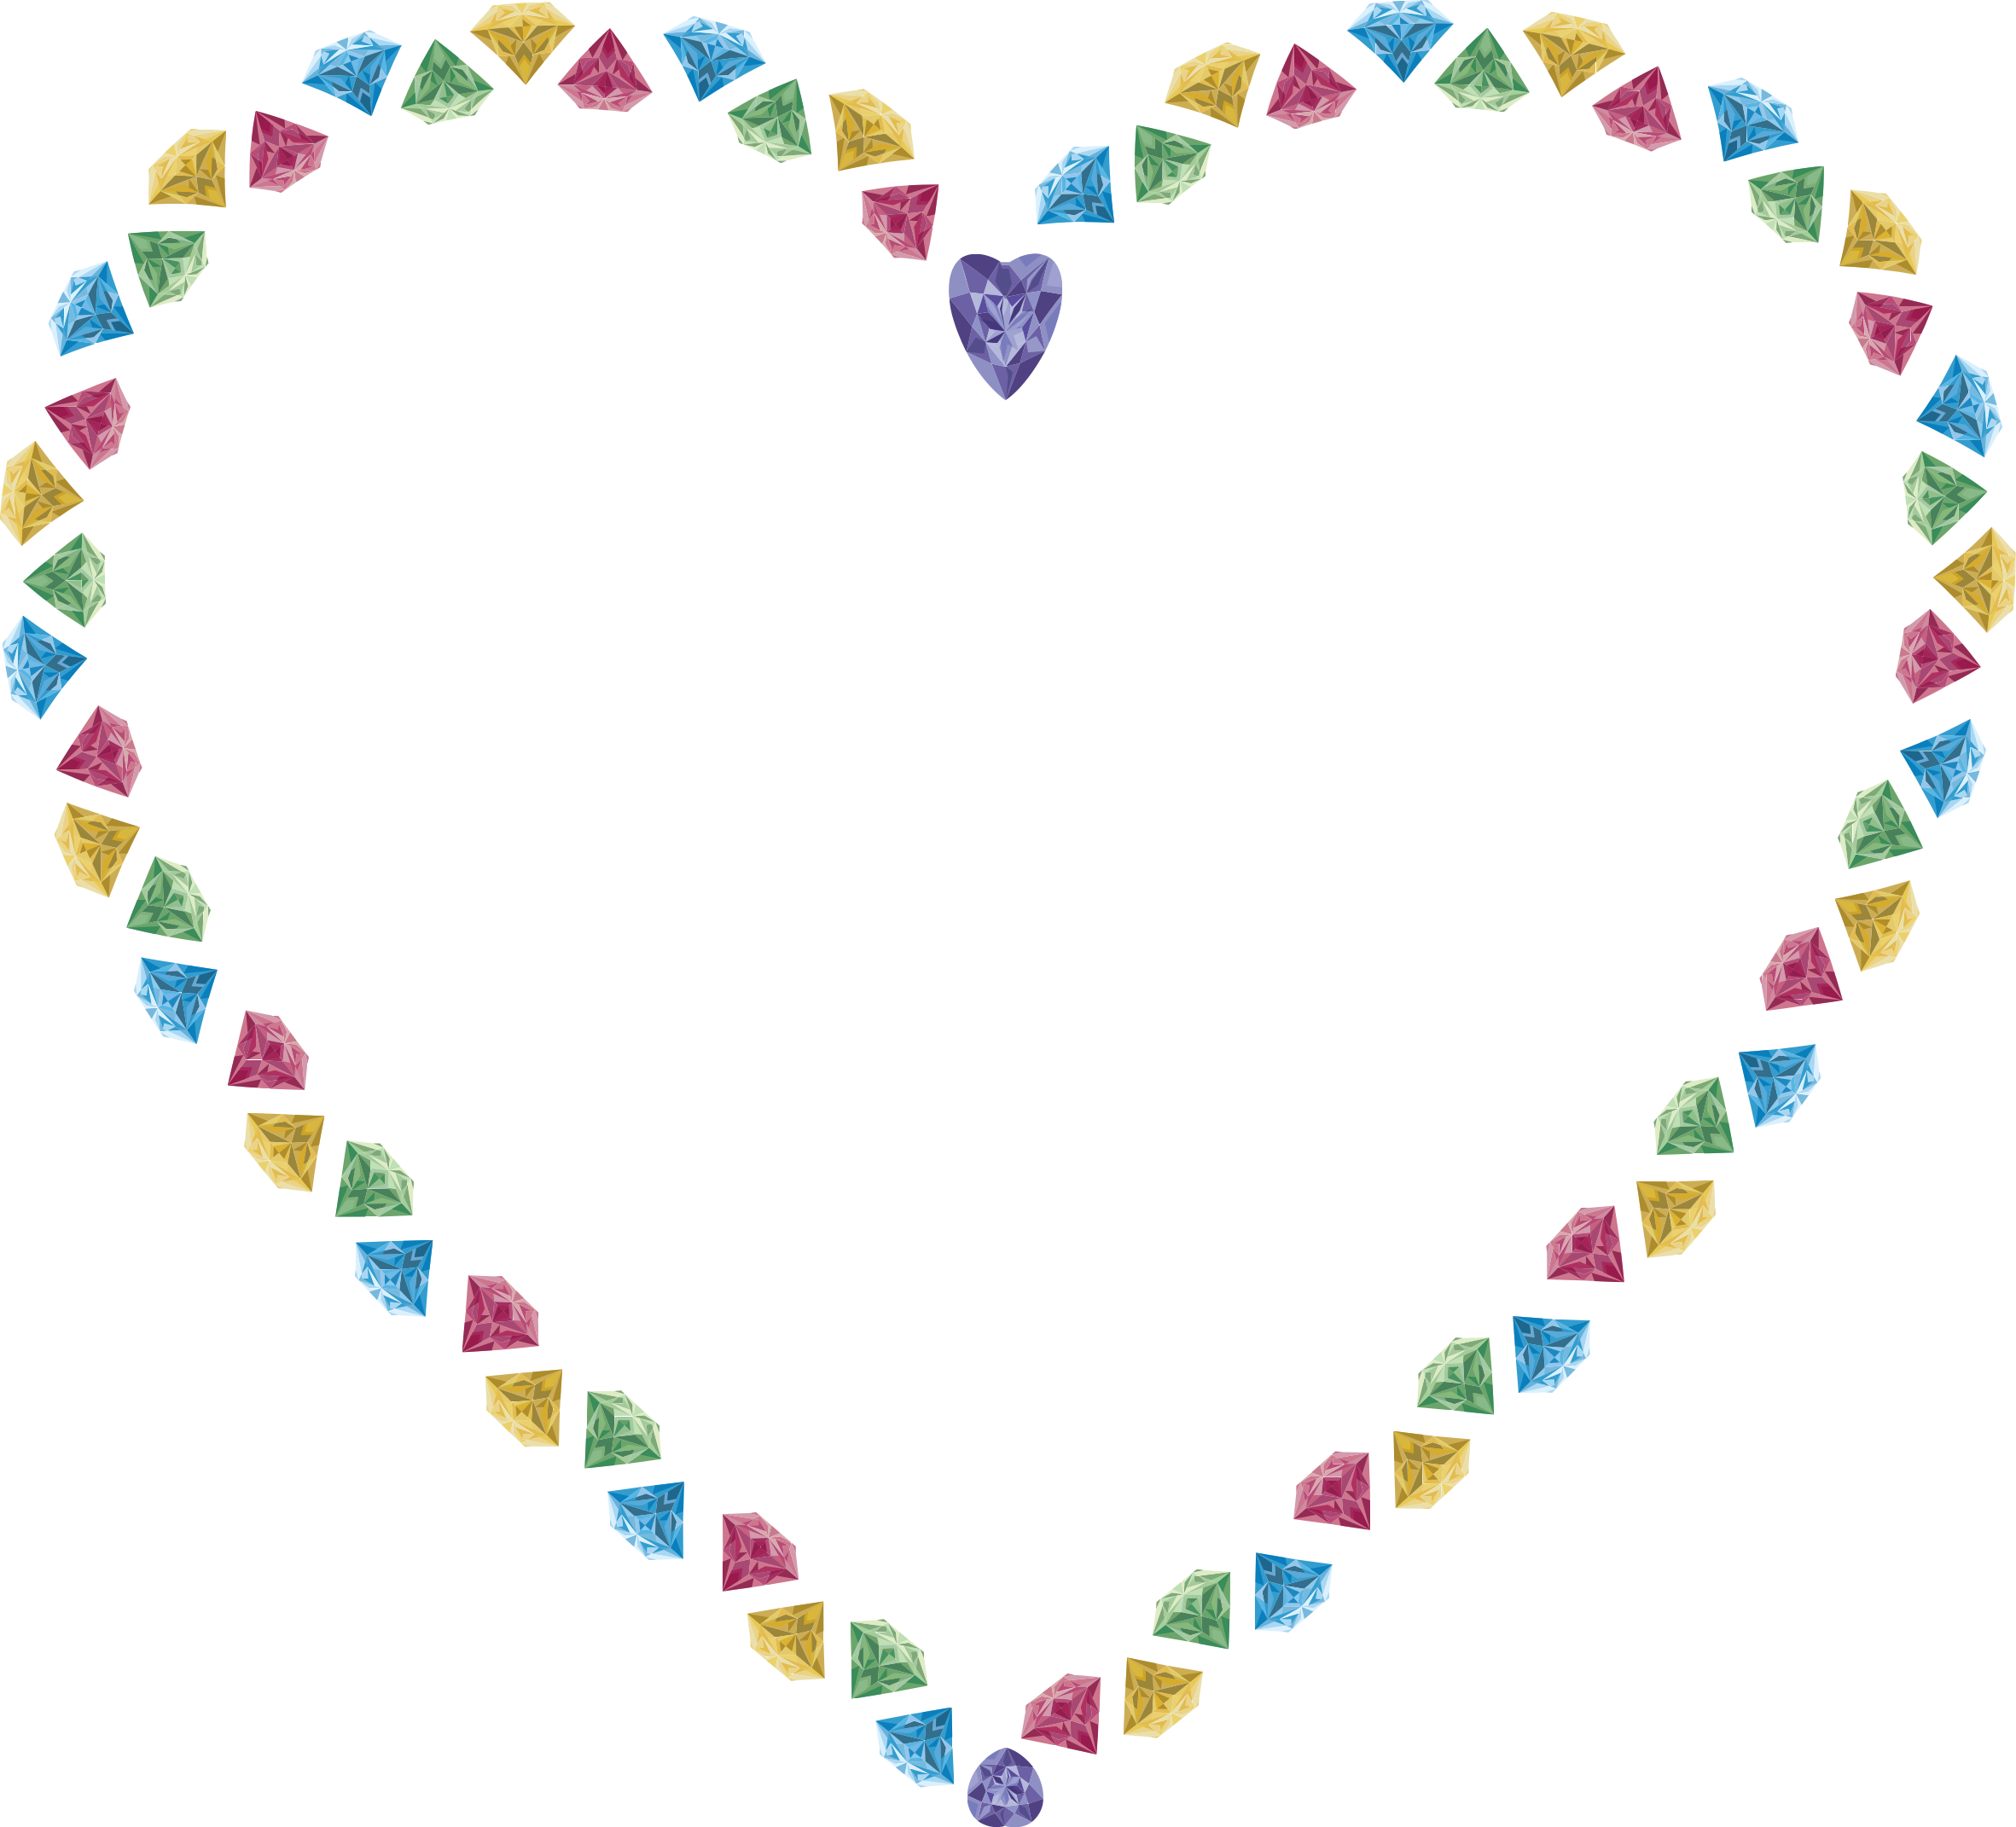 Gemstones icons png free. Gem clipart heart